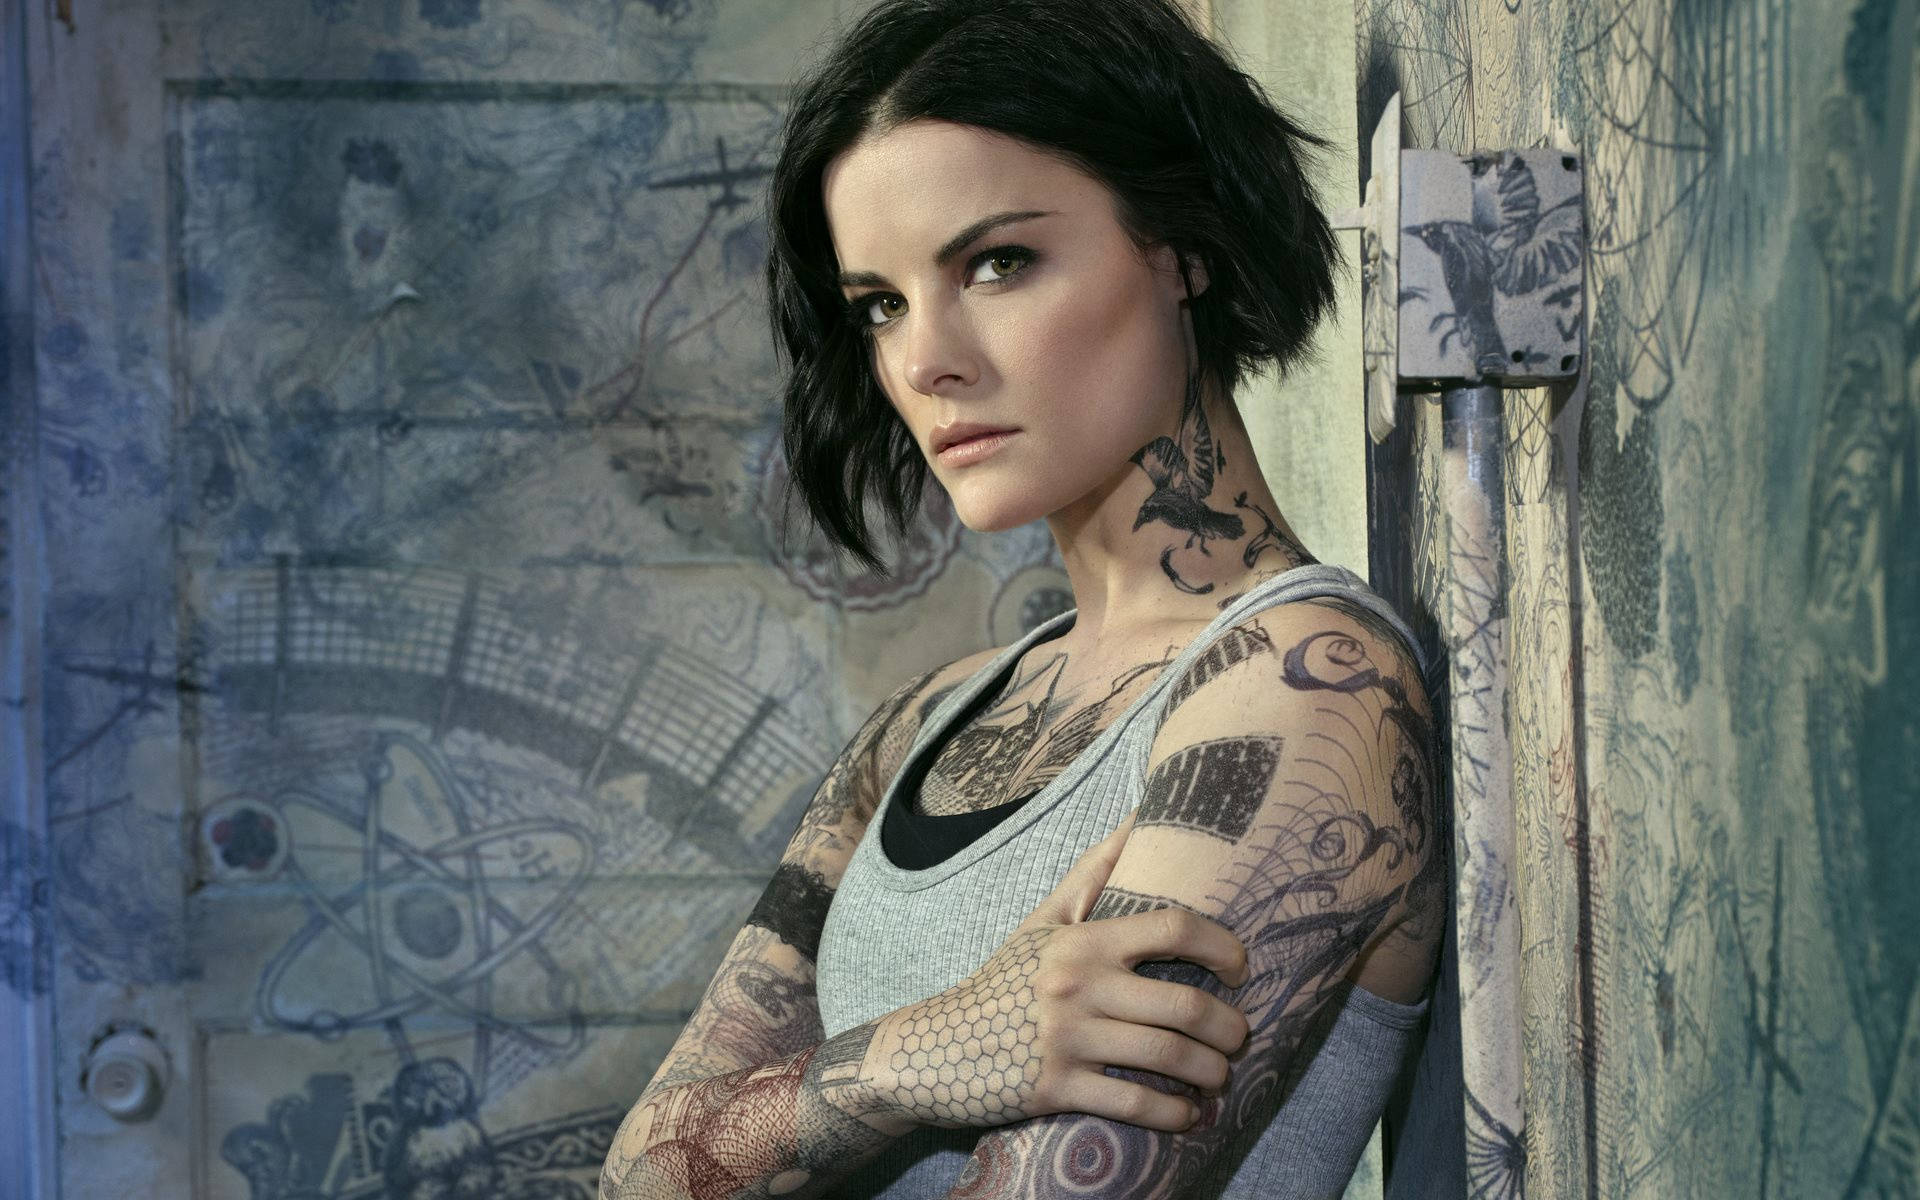 Exclusive: Jaimie Alexander on the return of Blindspot | Movies |  %%channel_name%%